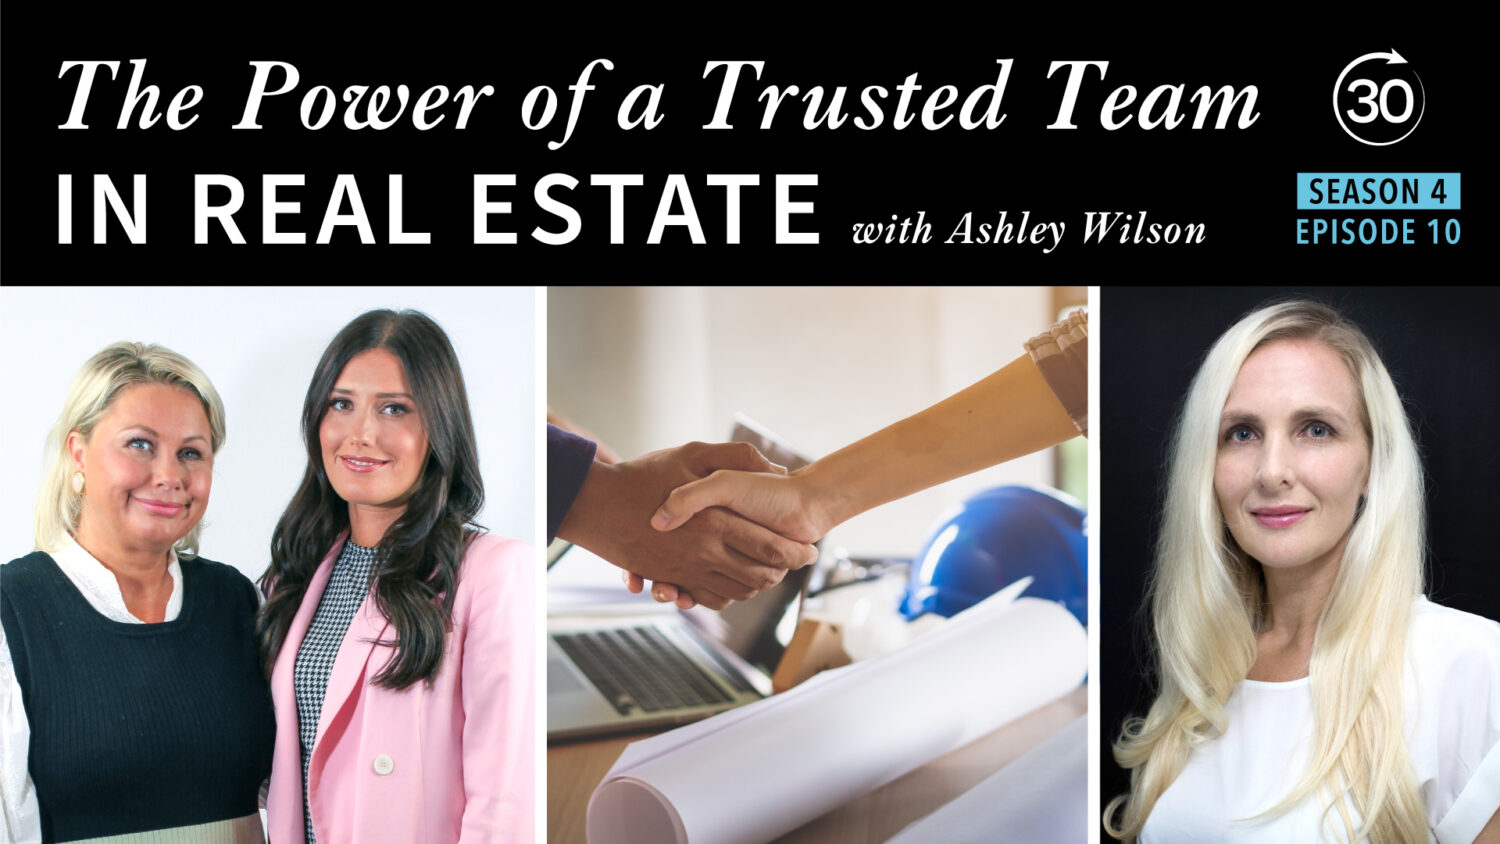 S4 E10 - The Power of a Trusted Team in Real Estate